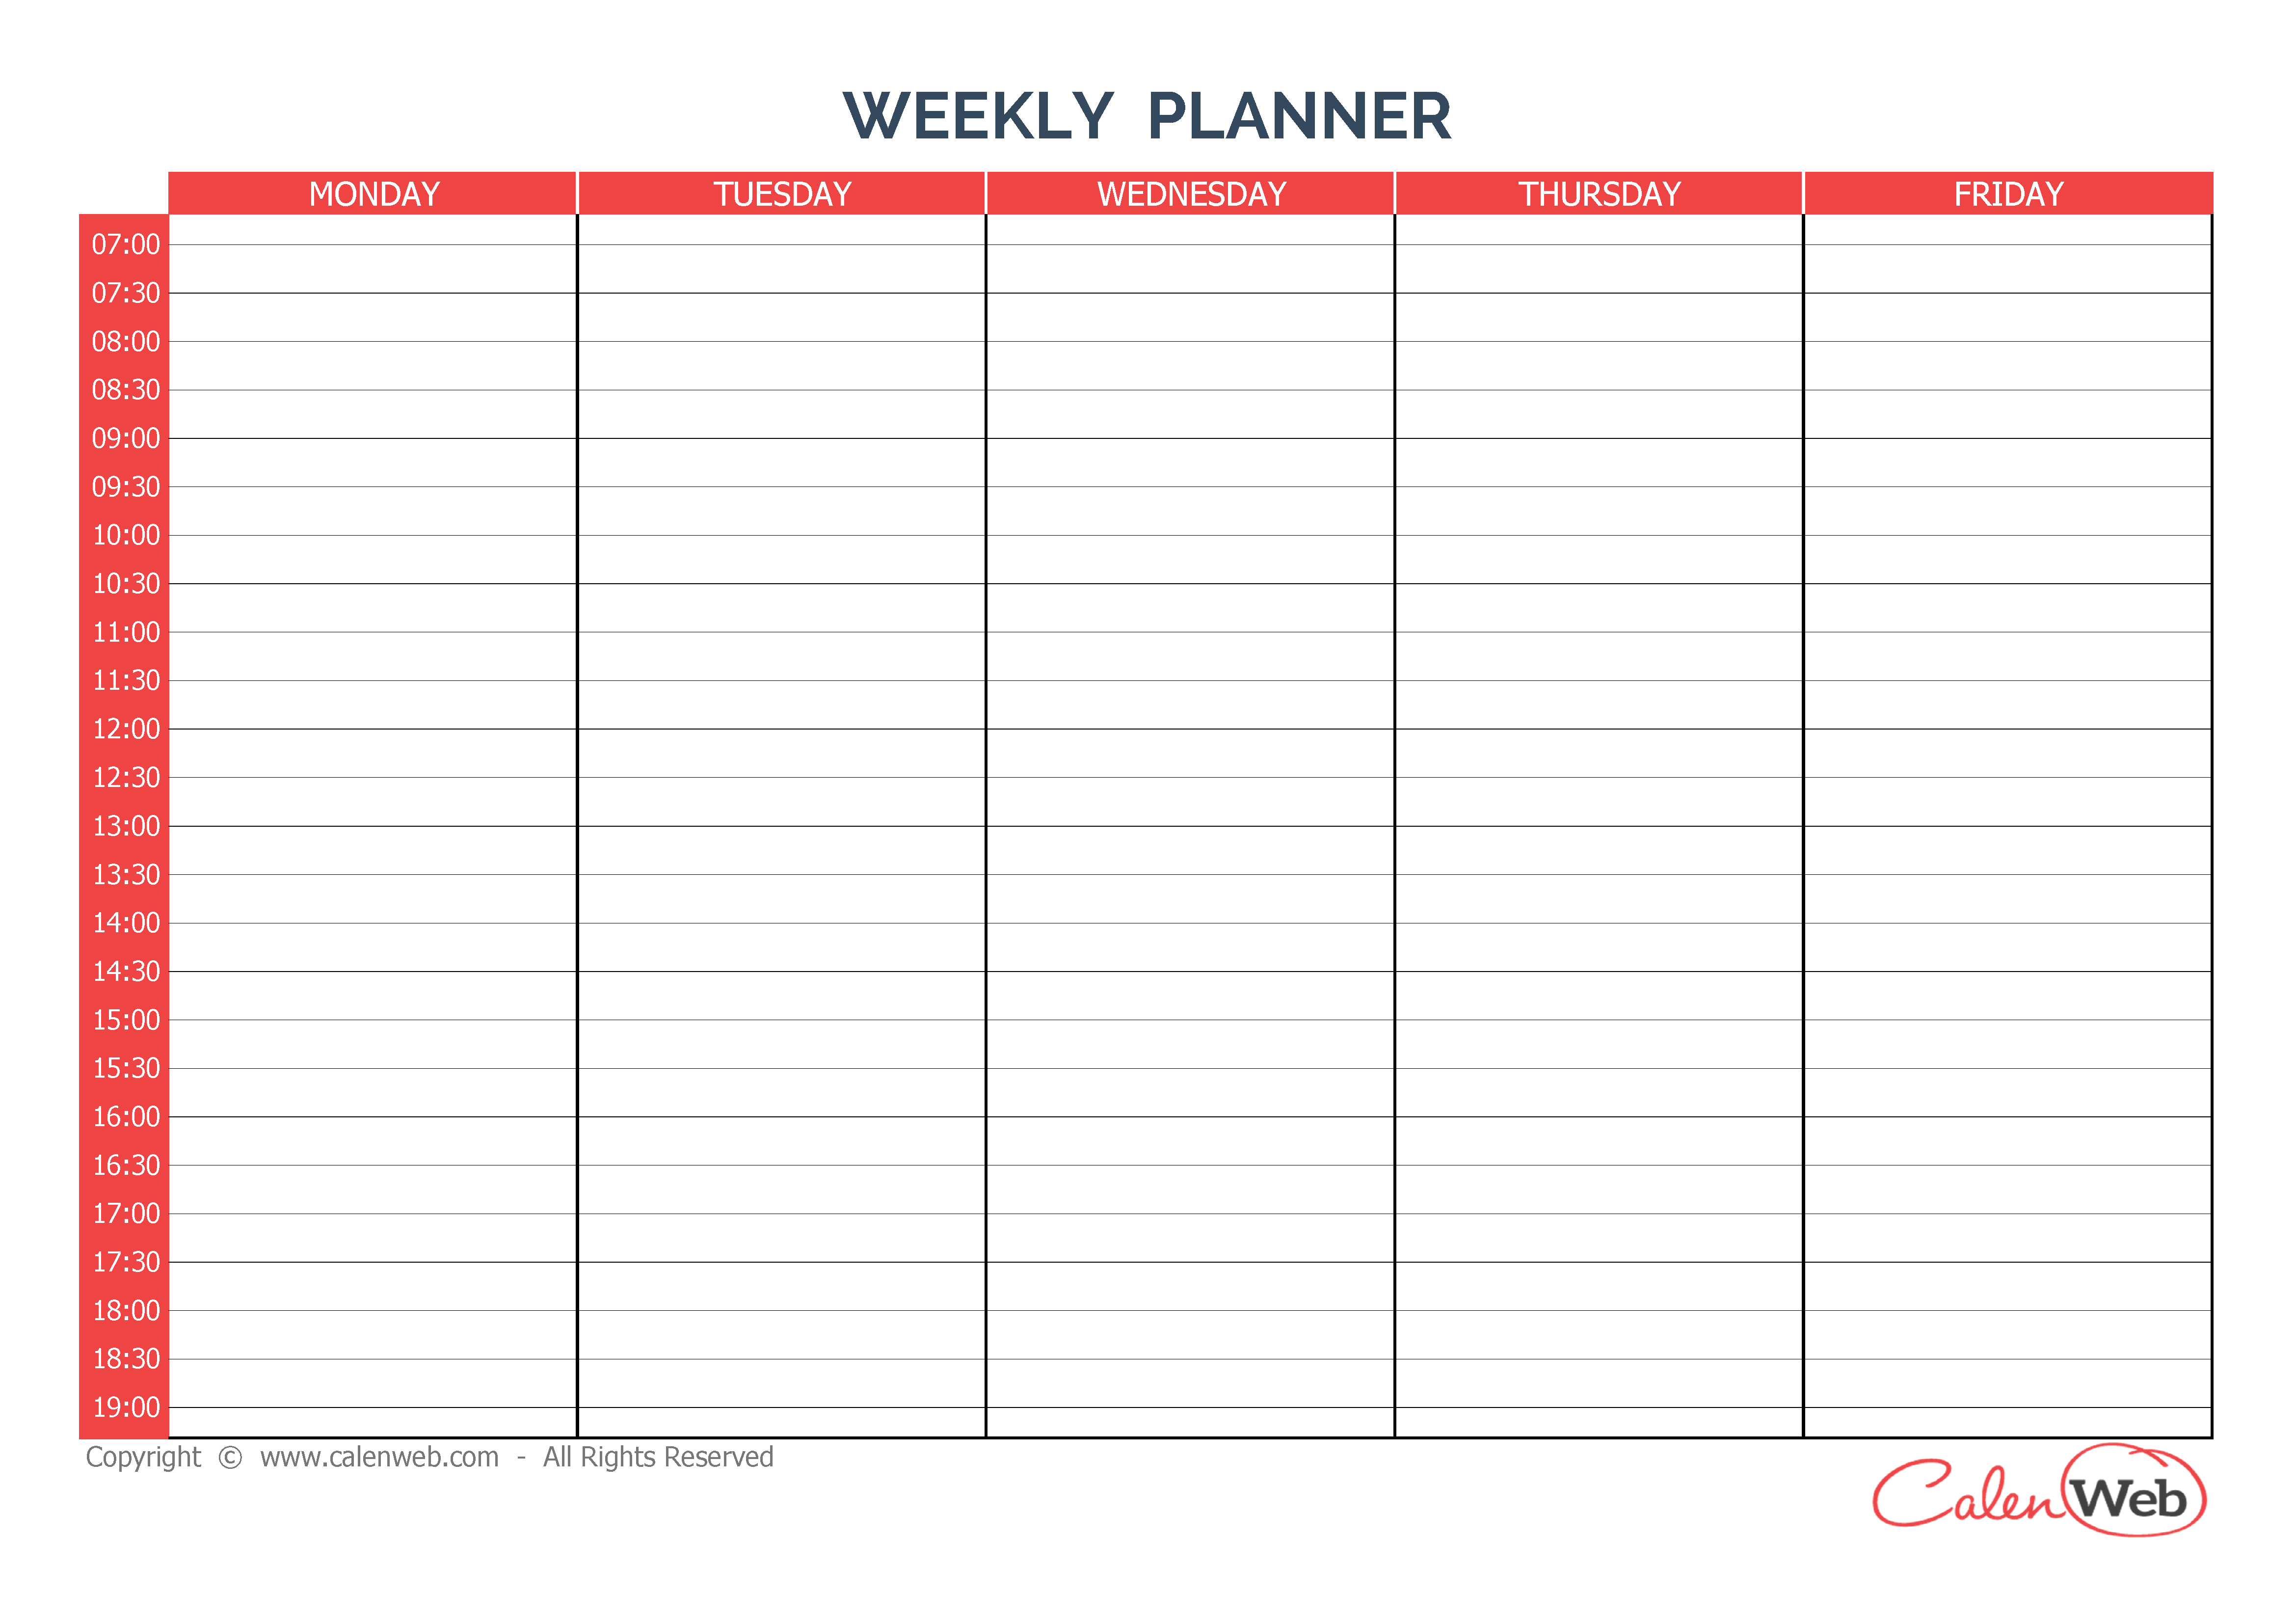 Weekly Planner 5 Days A Week Of 5 Days  Calenweb pertaining to Printable Weekly Calendar Monday Through Friday